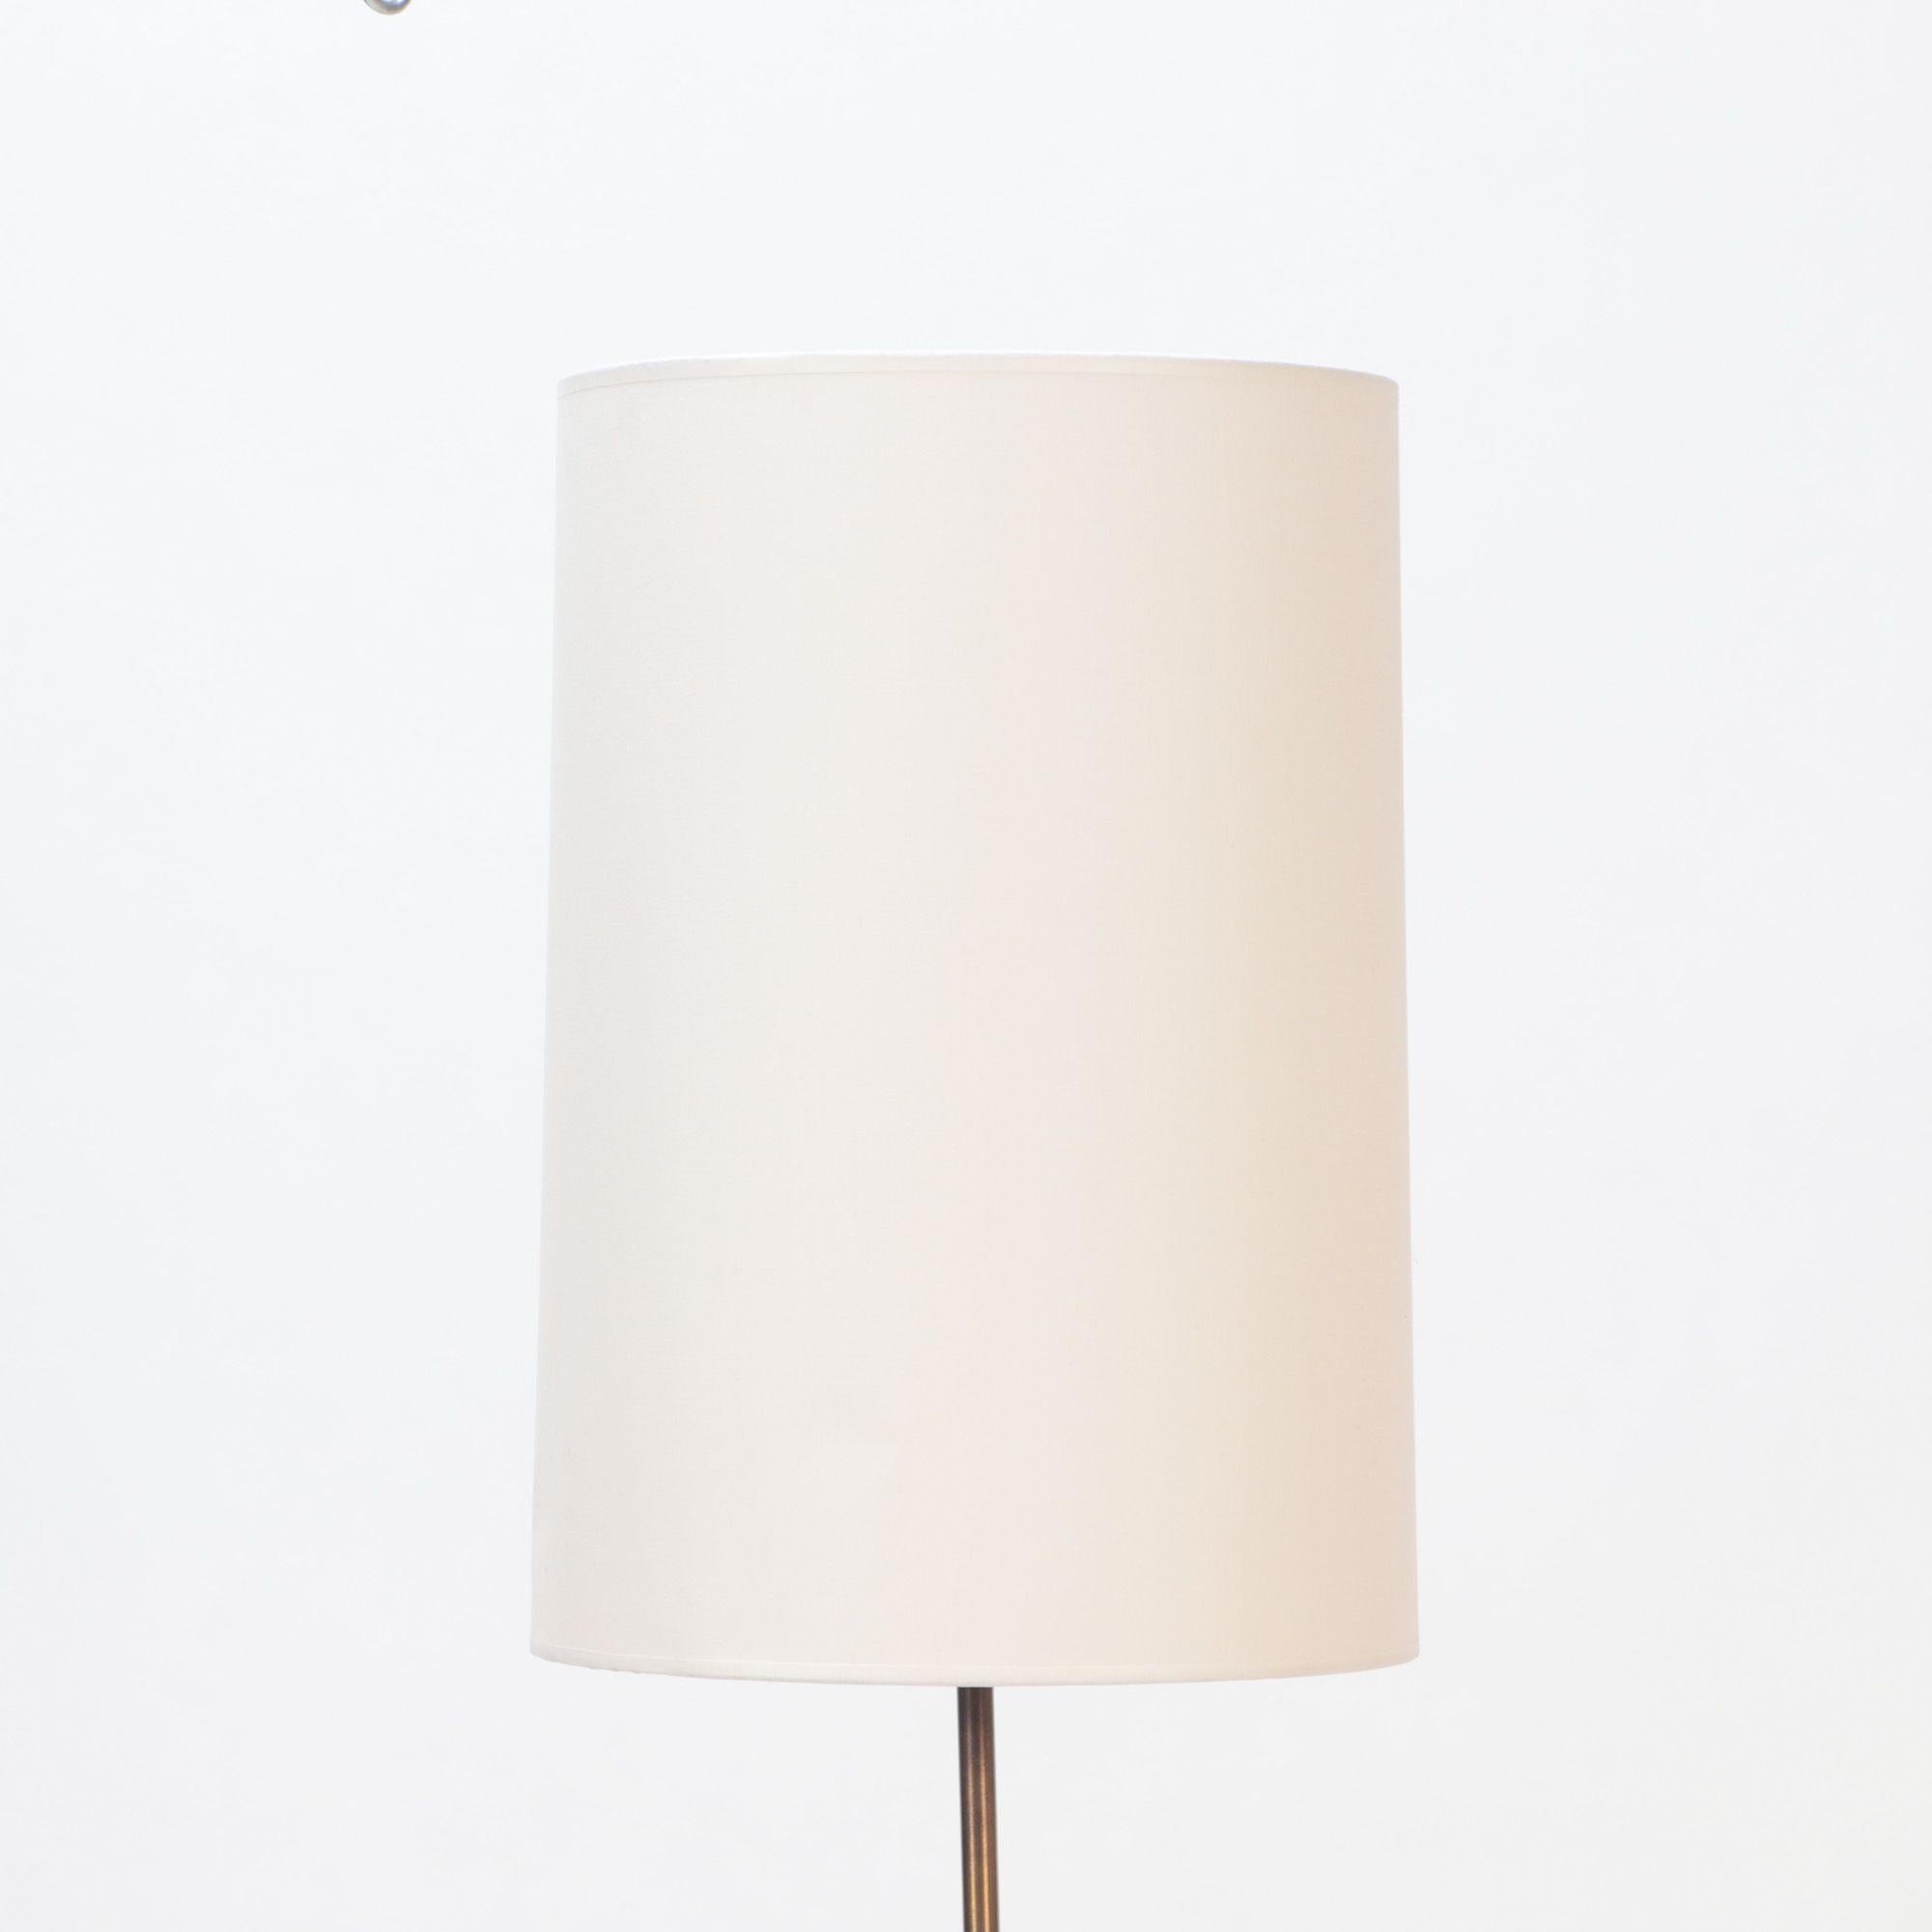 A Mid-Century Modern Swedish floor lamp on a glass base. Brass with wooden details. C 1950.